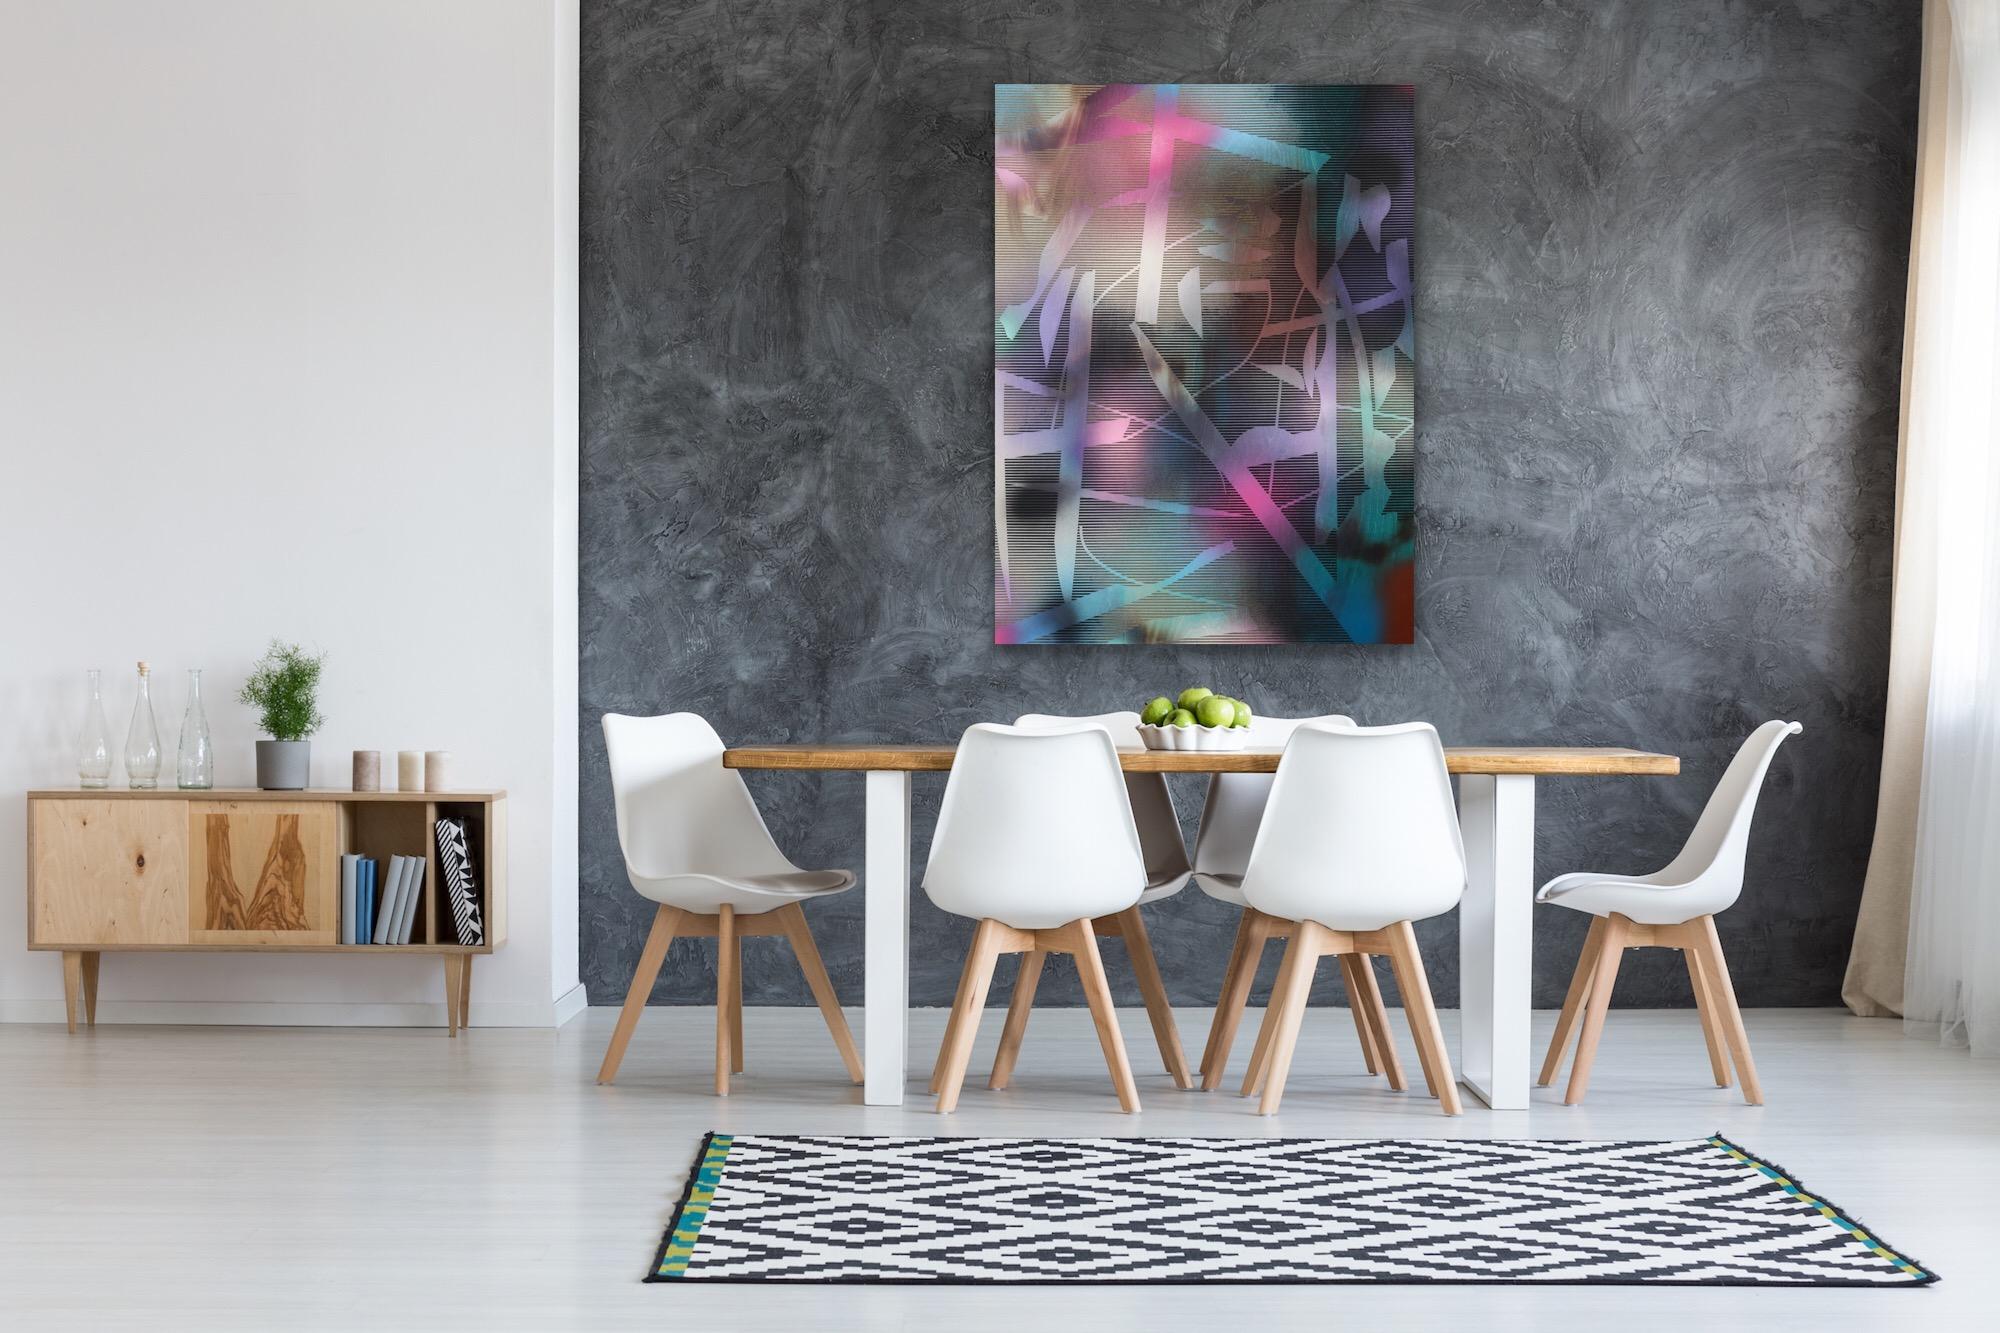 in City and in Forest 29 (grid painting abstract wood contemporary jewel tones) - Gray Abstract Painting by Melisa Taylor Metzger